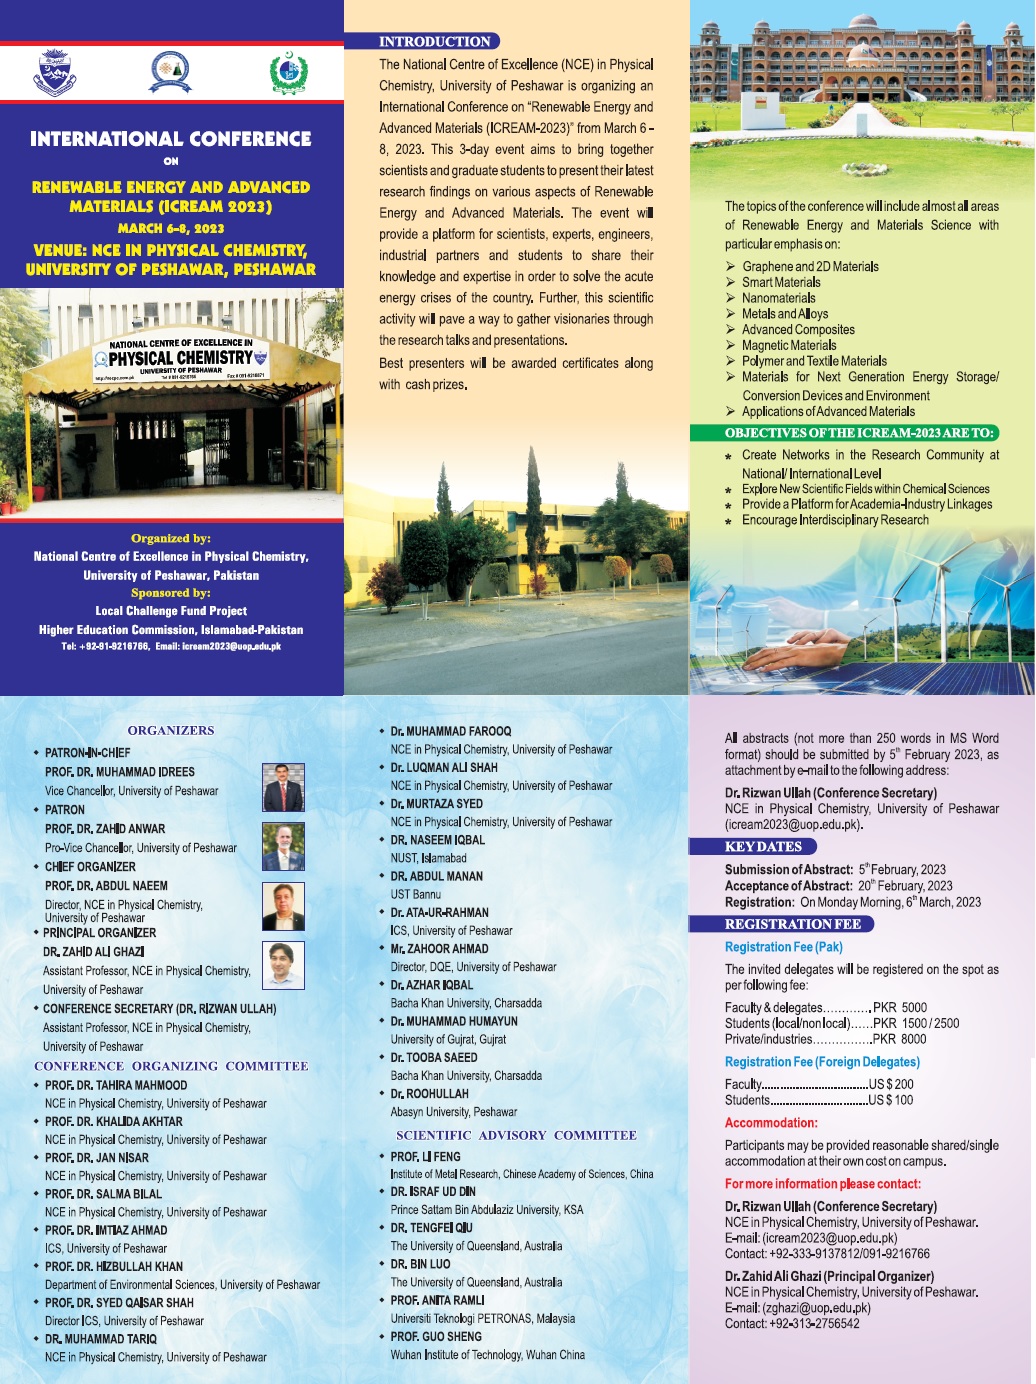 International Conference on Renewable Energy and Advanced Materials(ICREAM 2023)